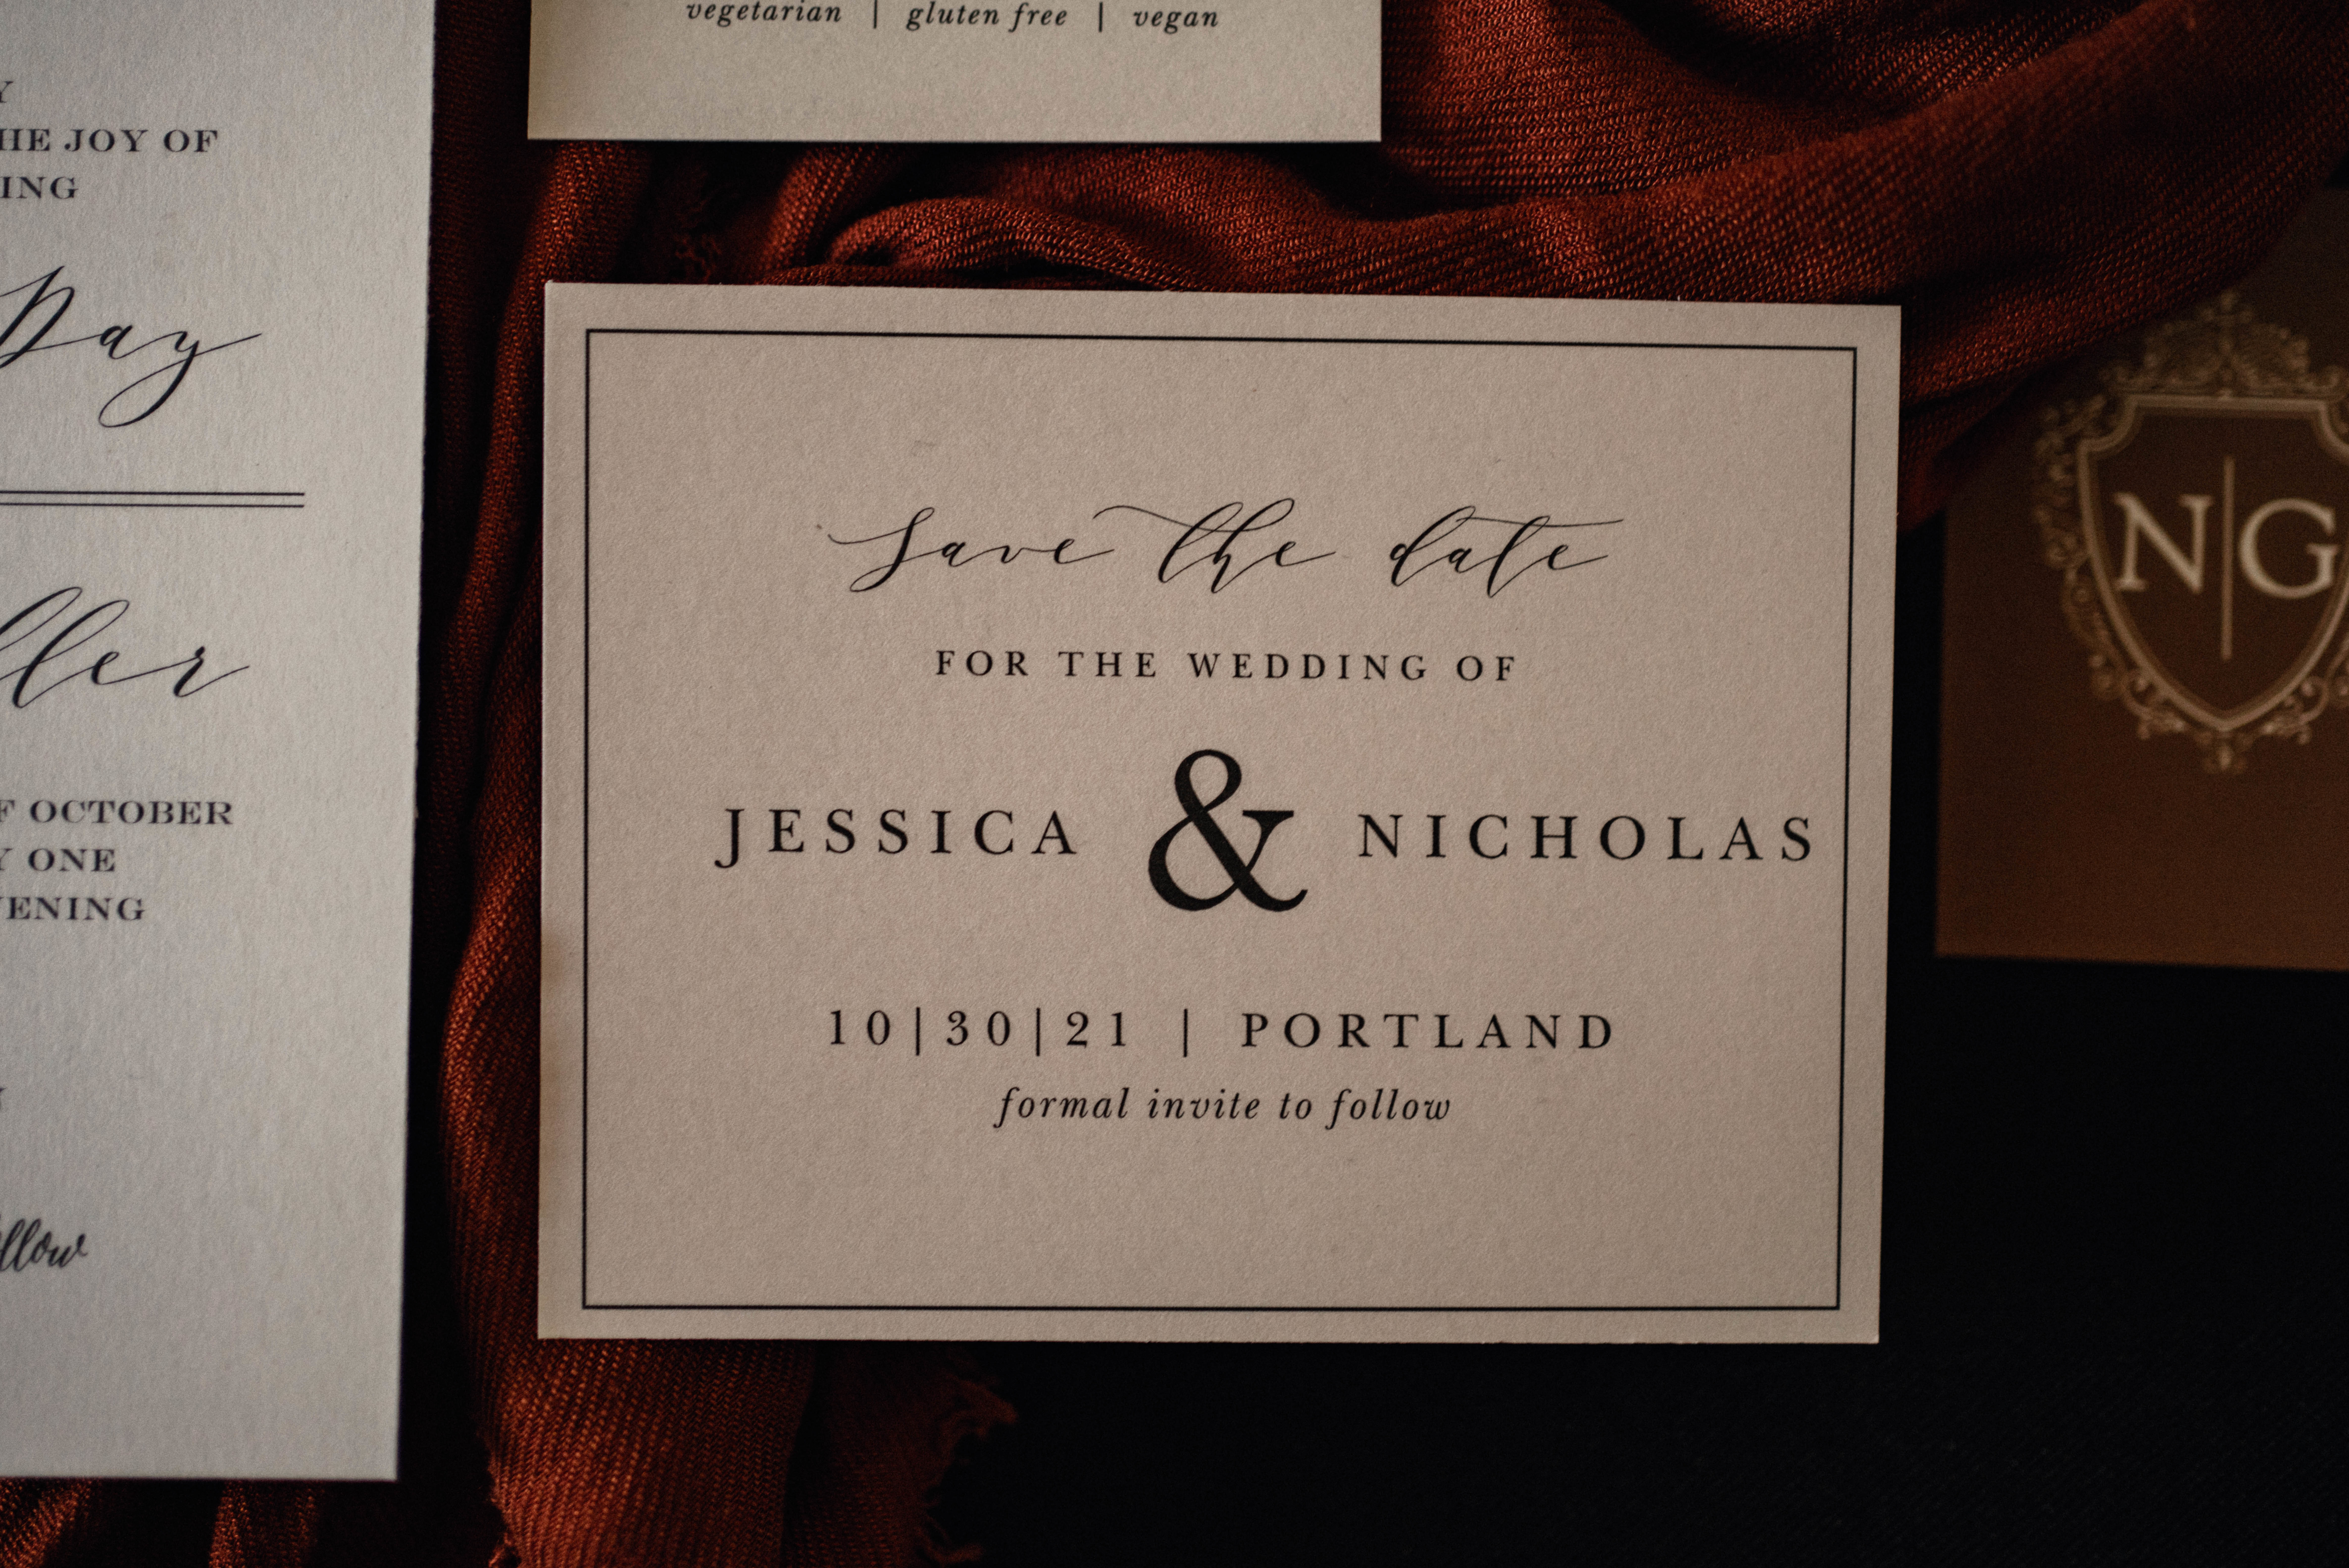 Save the date card from basic invite